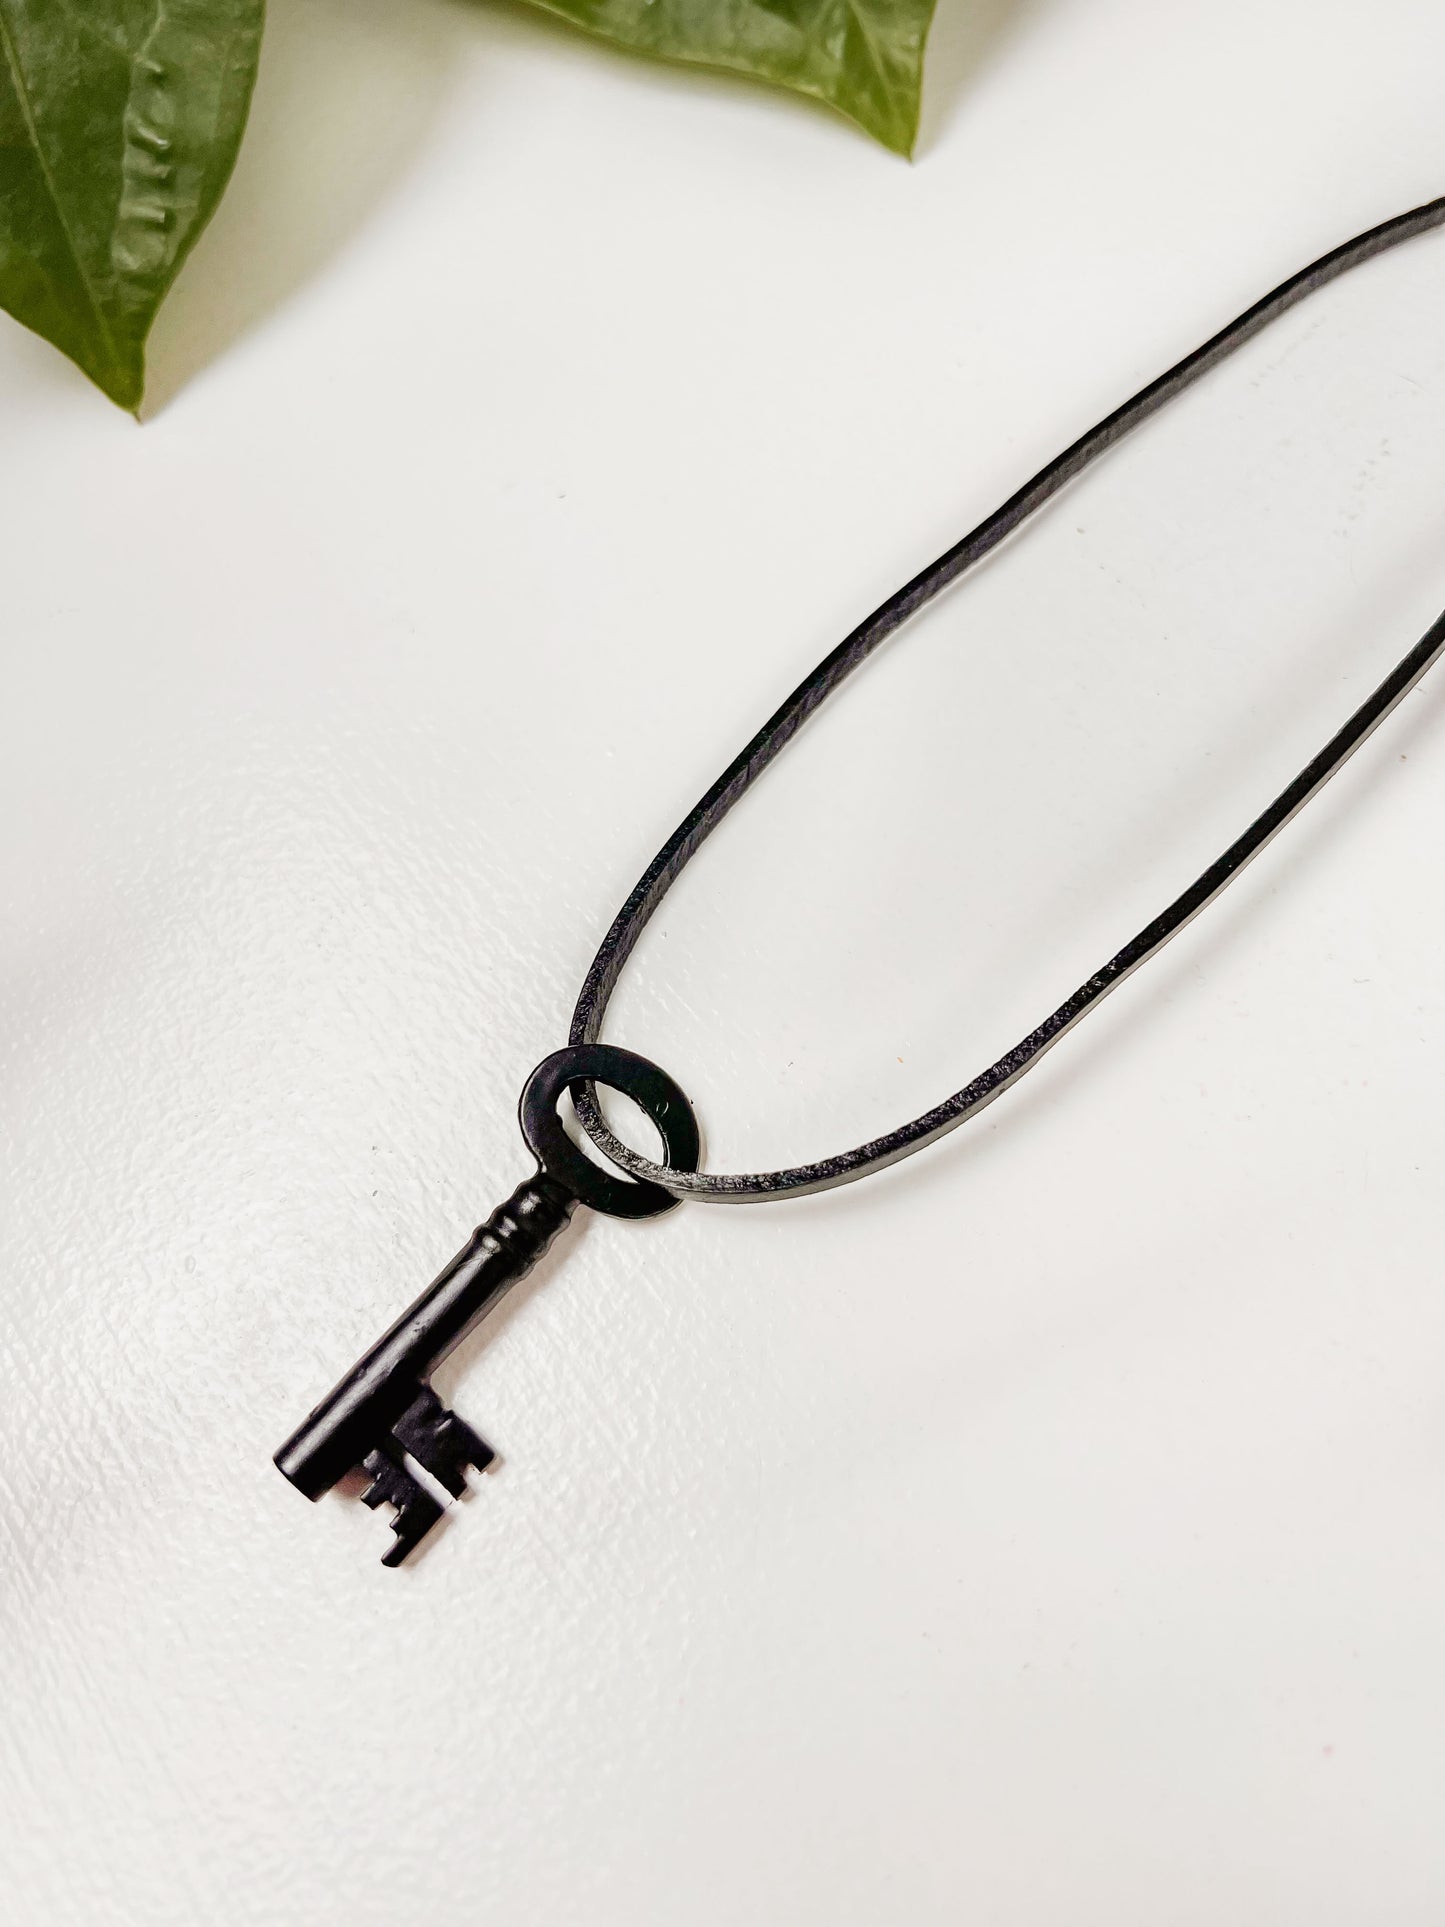 Antique Intricate Skeleton Key with Black Suede Choker